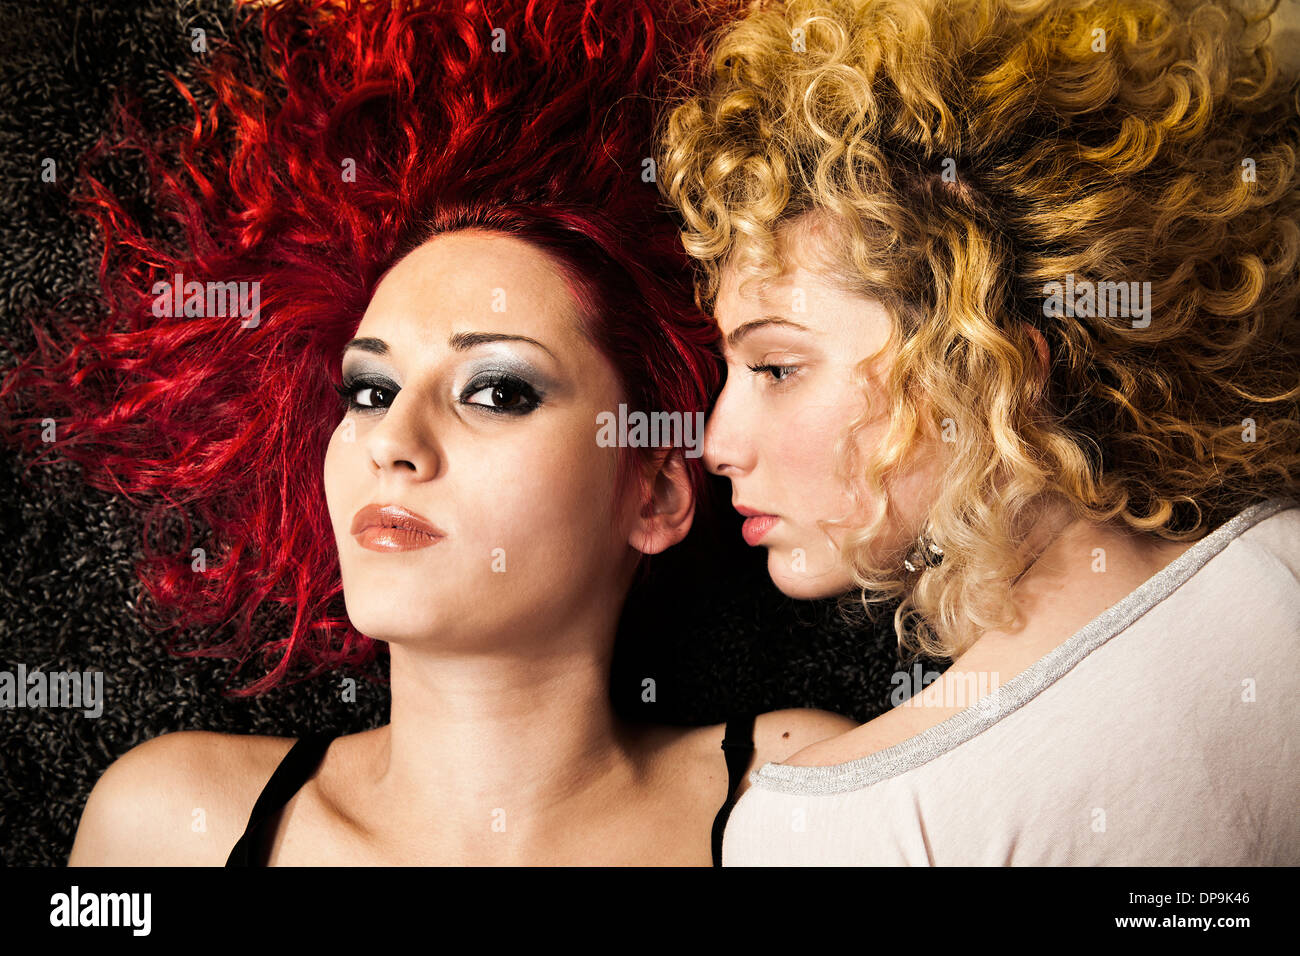 blond and red haired girls portrait Stock Photo